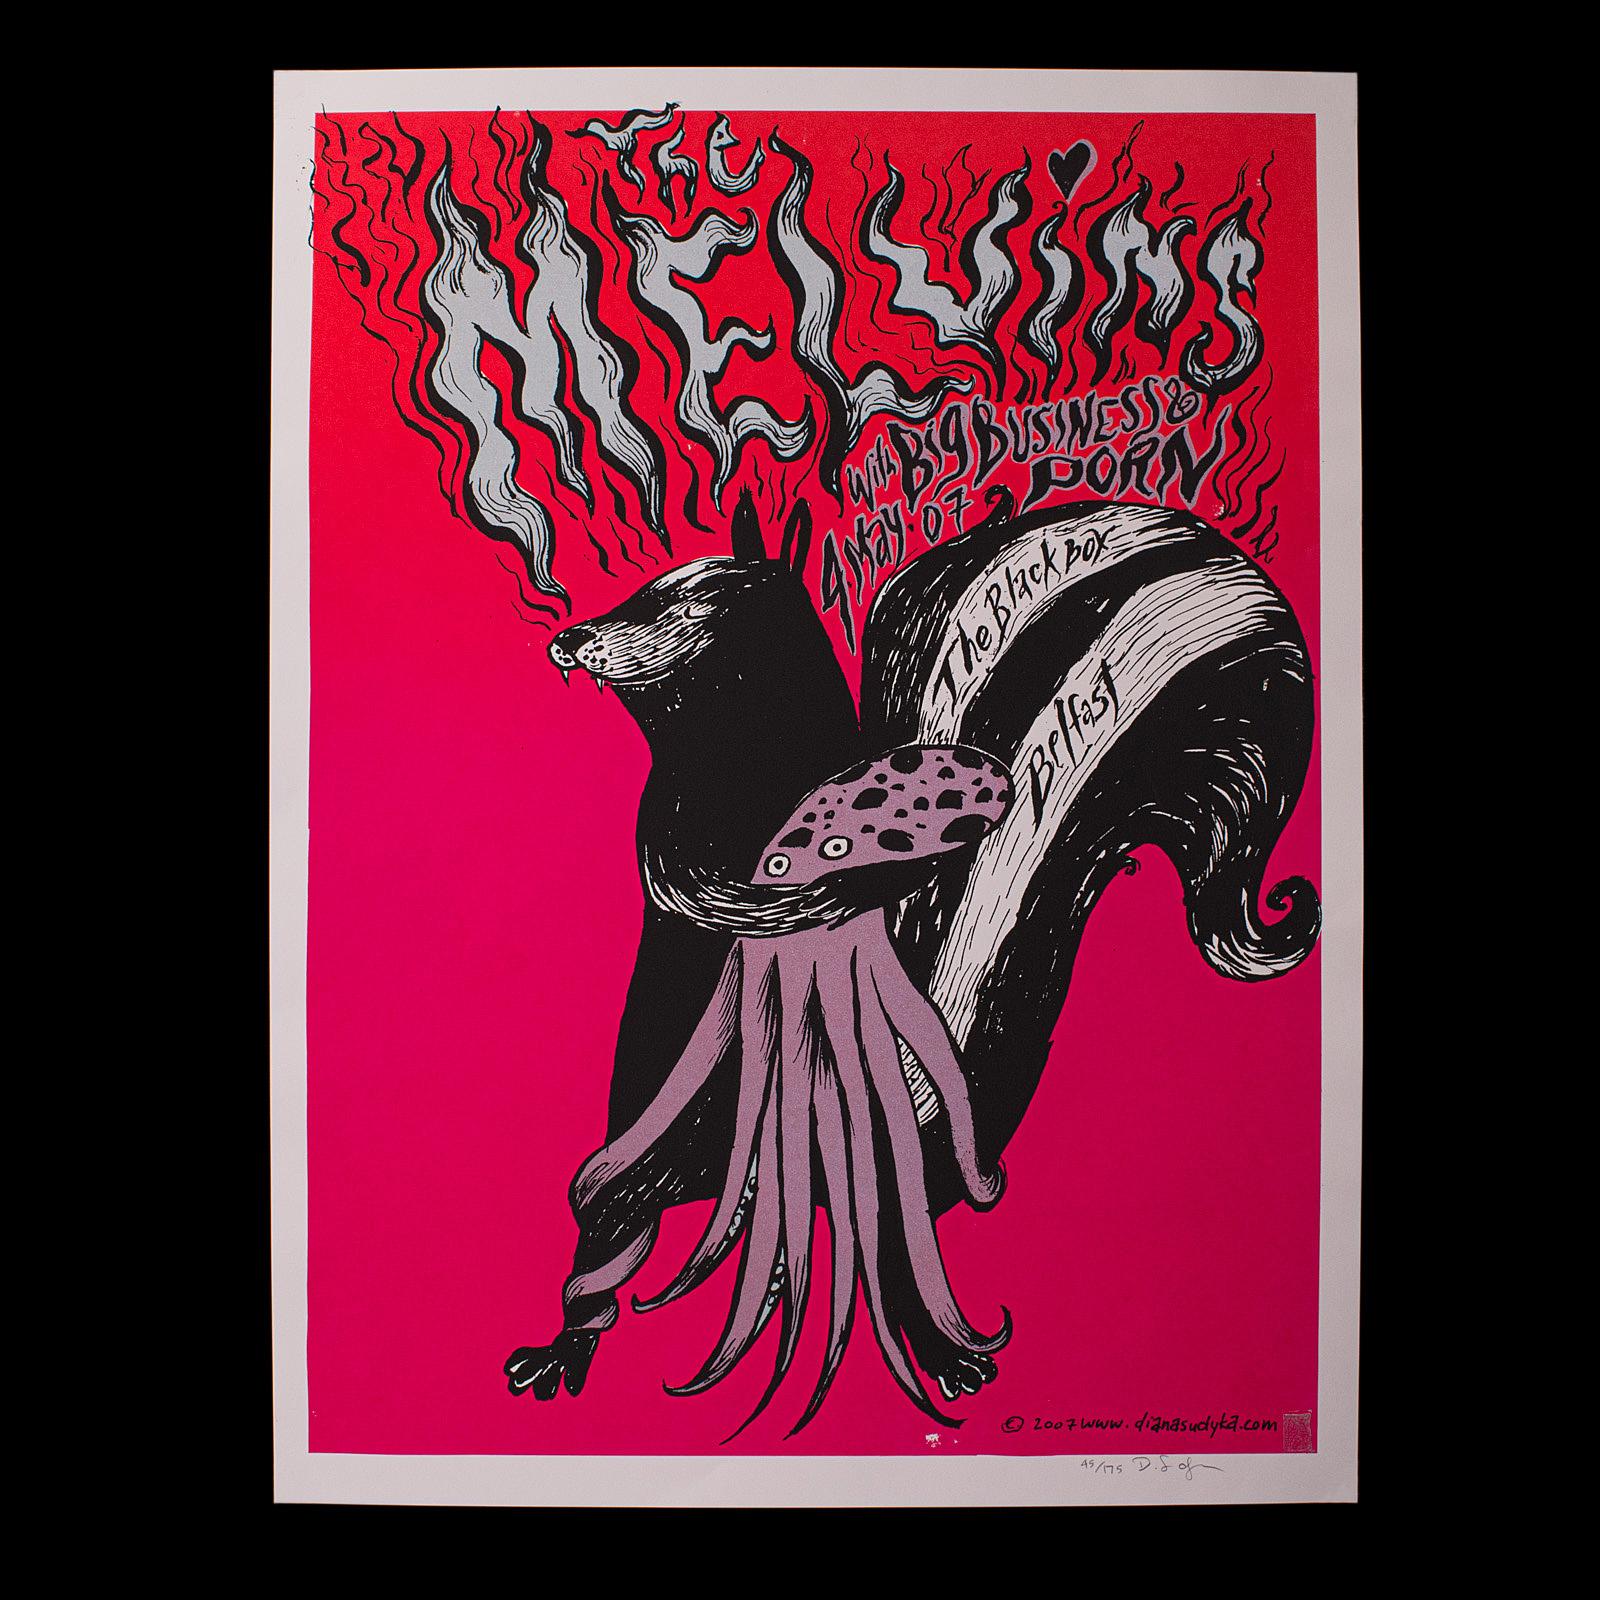 This is a decorative art screenprint for The Melvins. An American, rock concert poster signed by the artist, dated 2007.

Of superb character and finish, sure to delight fans and collectors alike
In gallery exhibition quality and very good